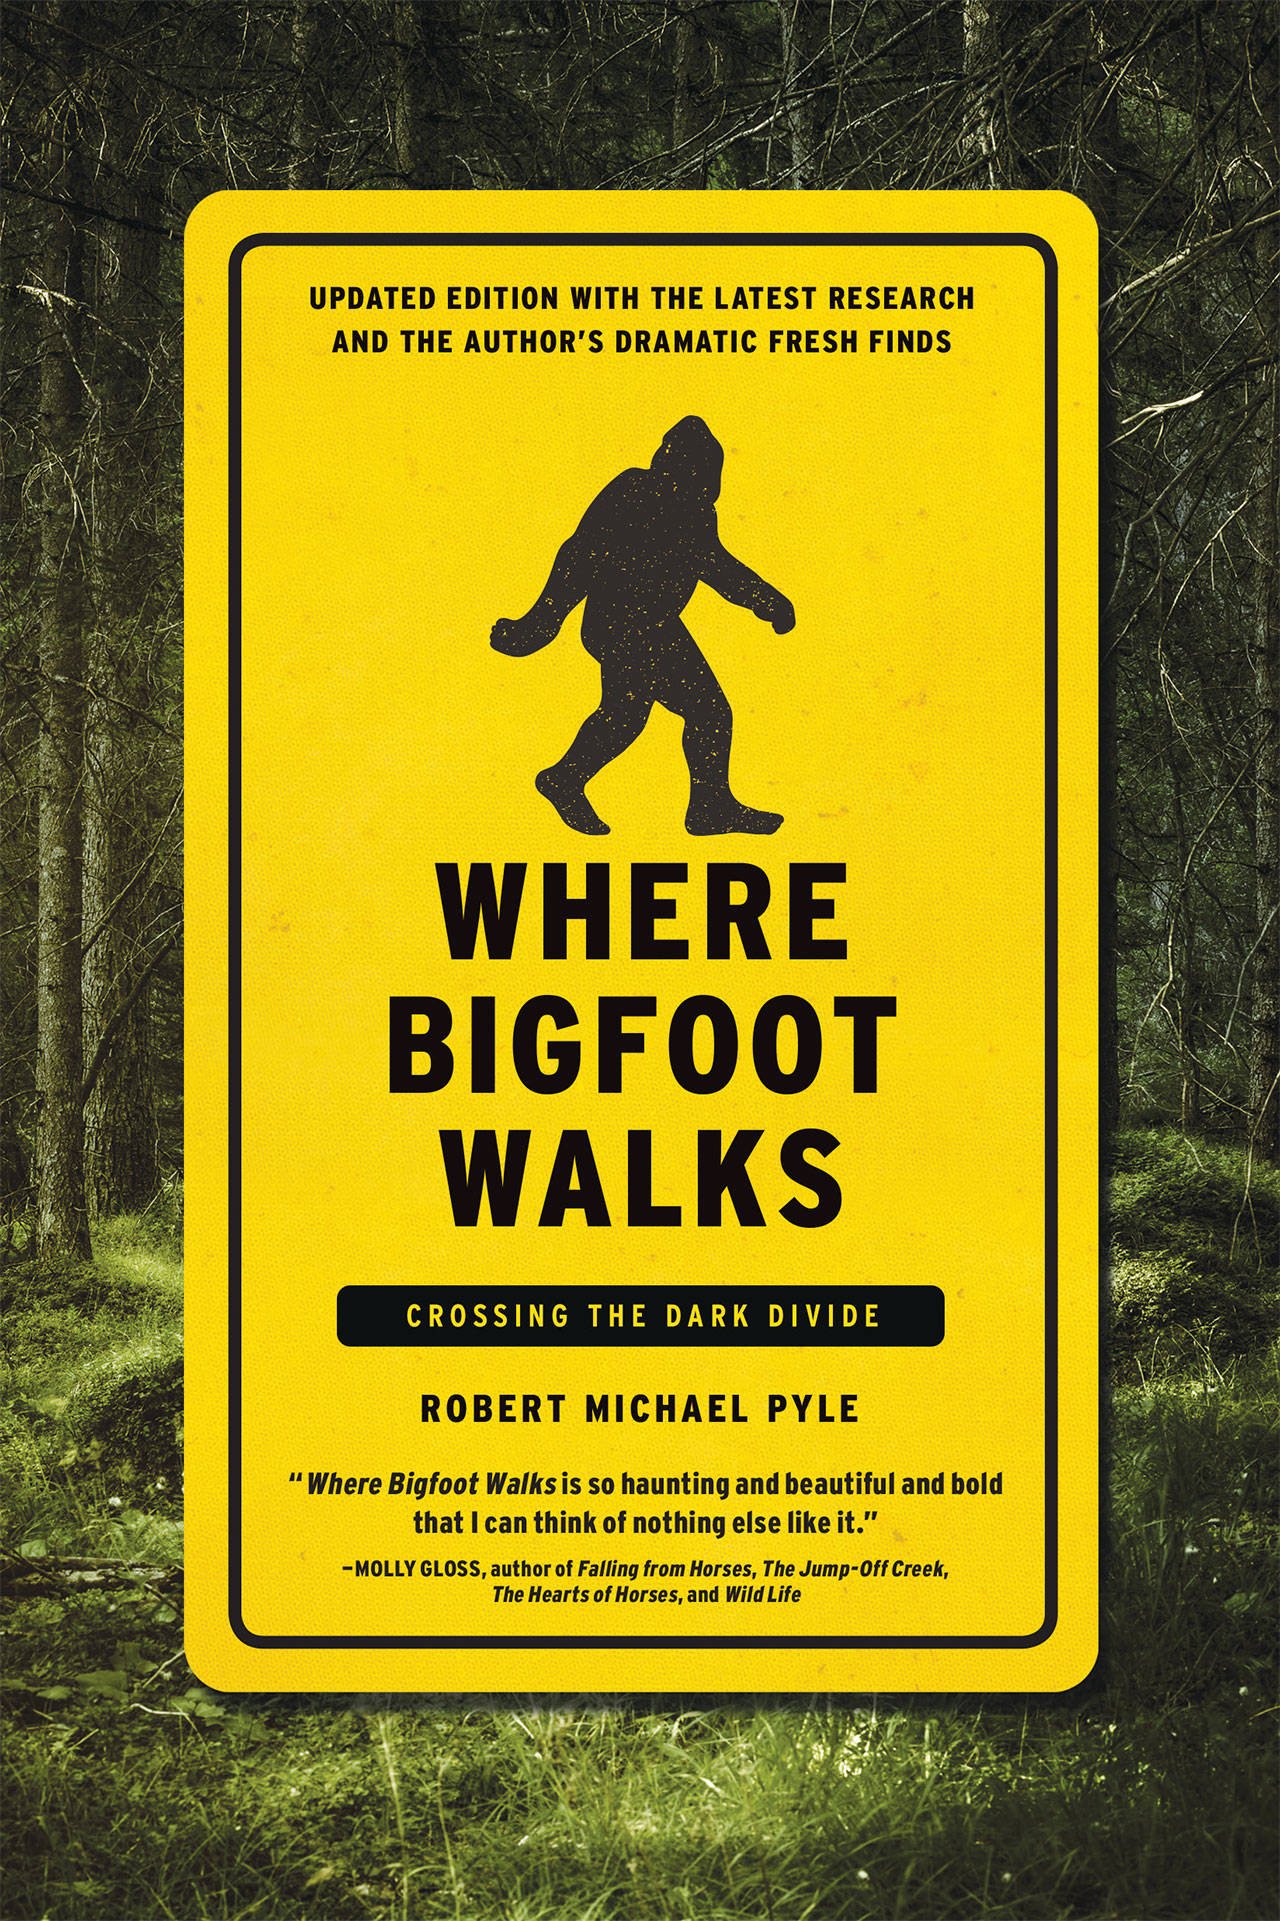 Image courtesy of Counterpoint Press | The new, updated version of Robert Michael Pyle’s seminal book “Where Bigfoot Walks: Crossing the Dark Divide” includes fresh material and a look at the latest Sasquatch revelations from around the country.                                 Image courtesy of Counterpoint Press | The new, updated version of Robert Michael Pyle’s seminal book “Where Bigfoot Walks: Crossing the Dark Divide” includes fresh material and a look at the latest Sasquatch revelations from around the country.